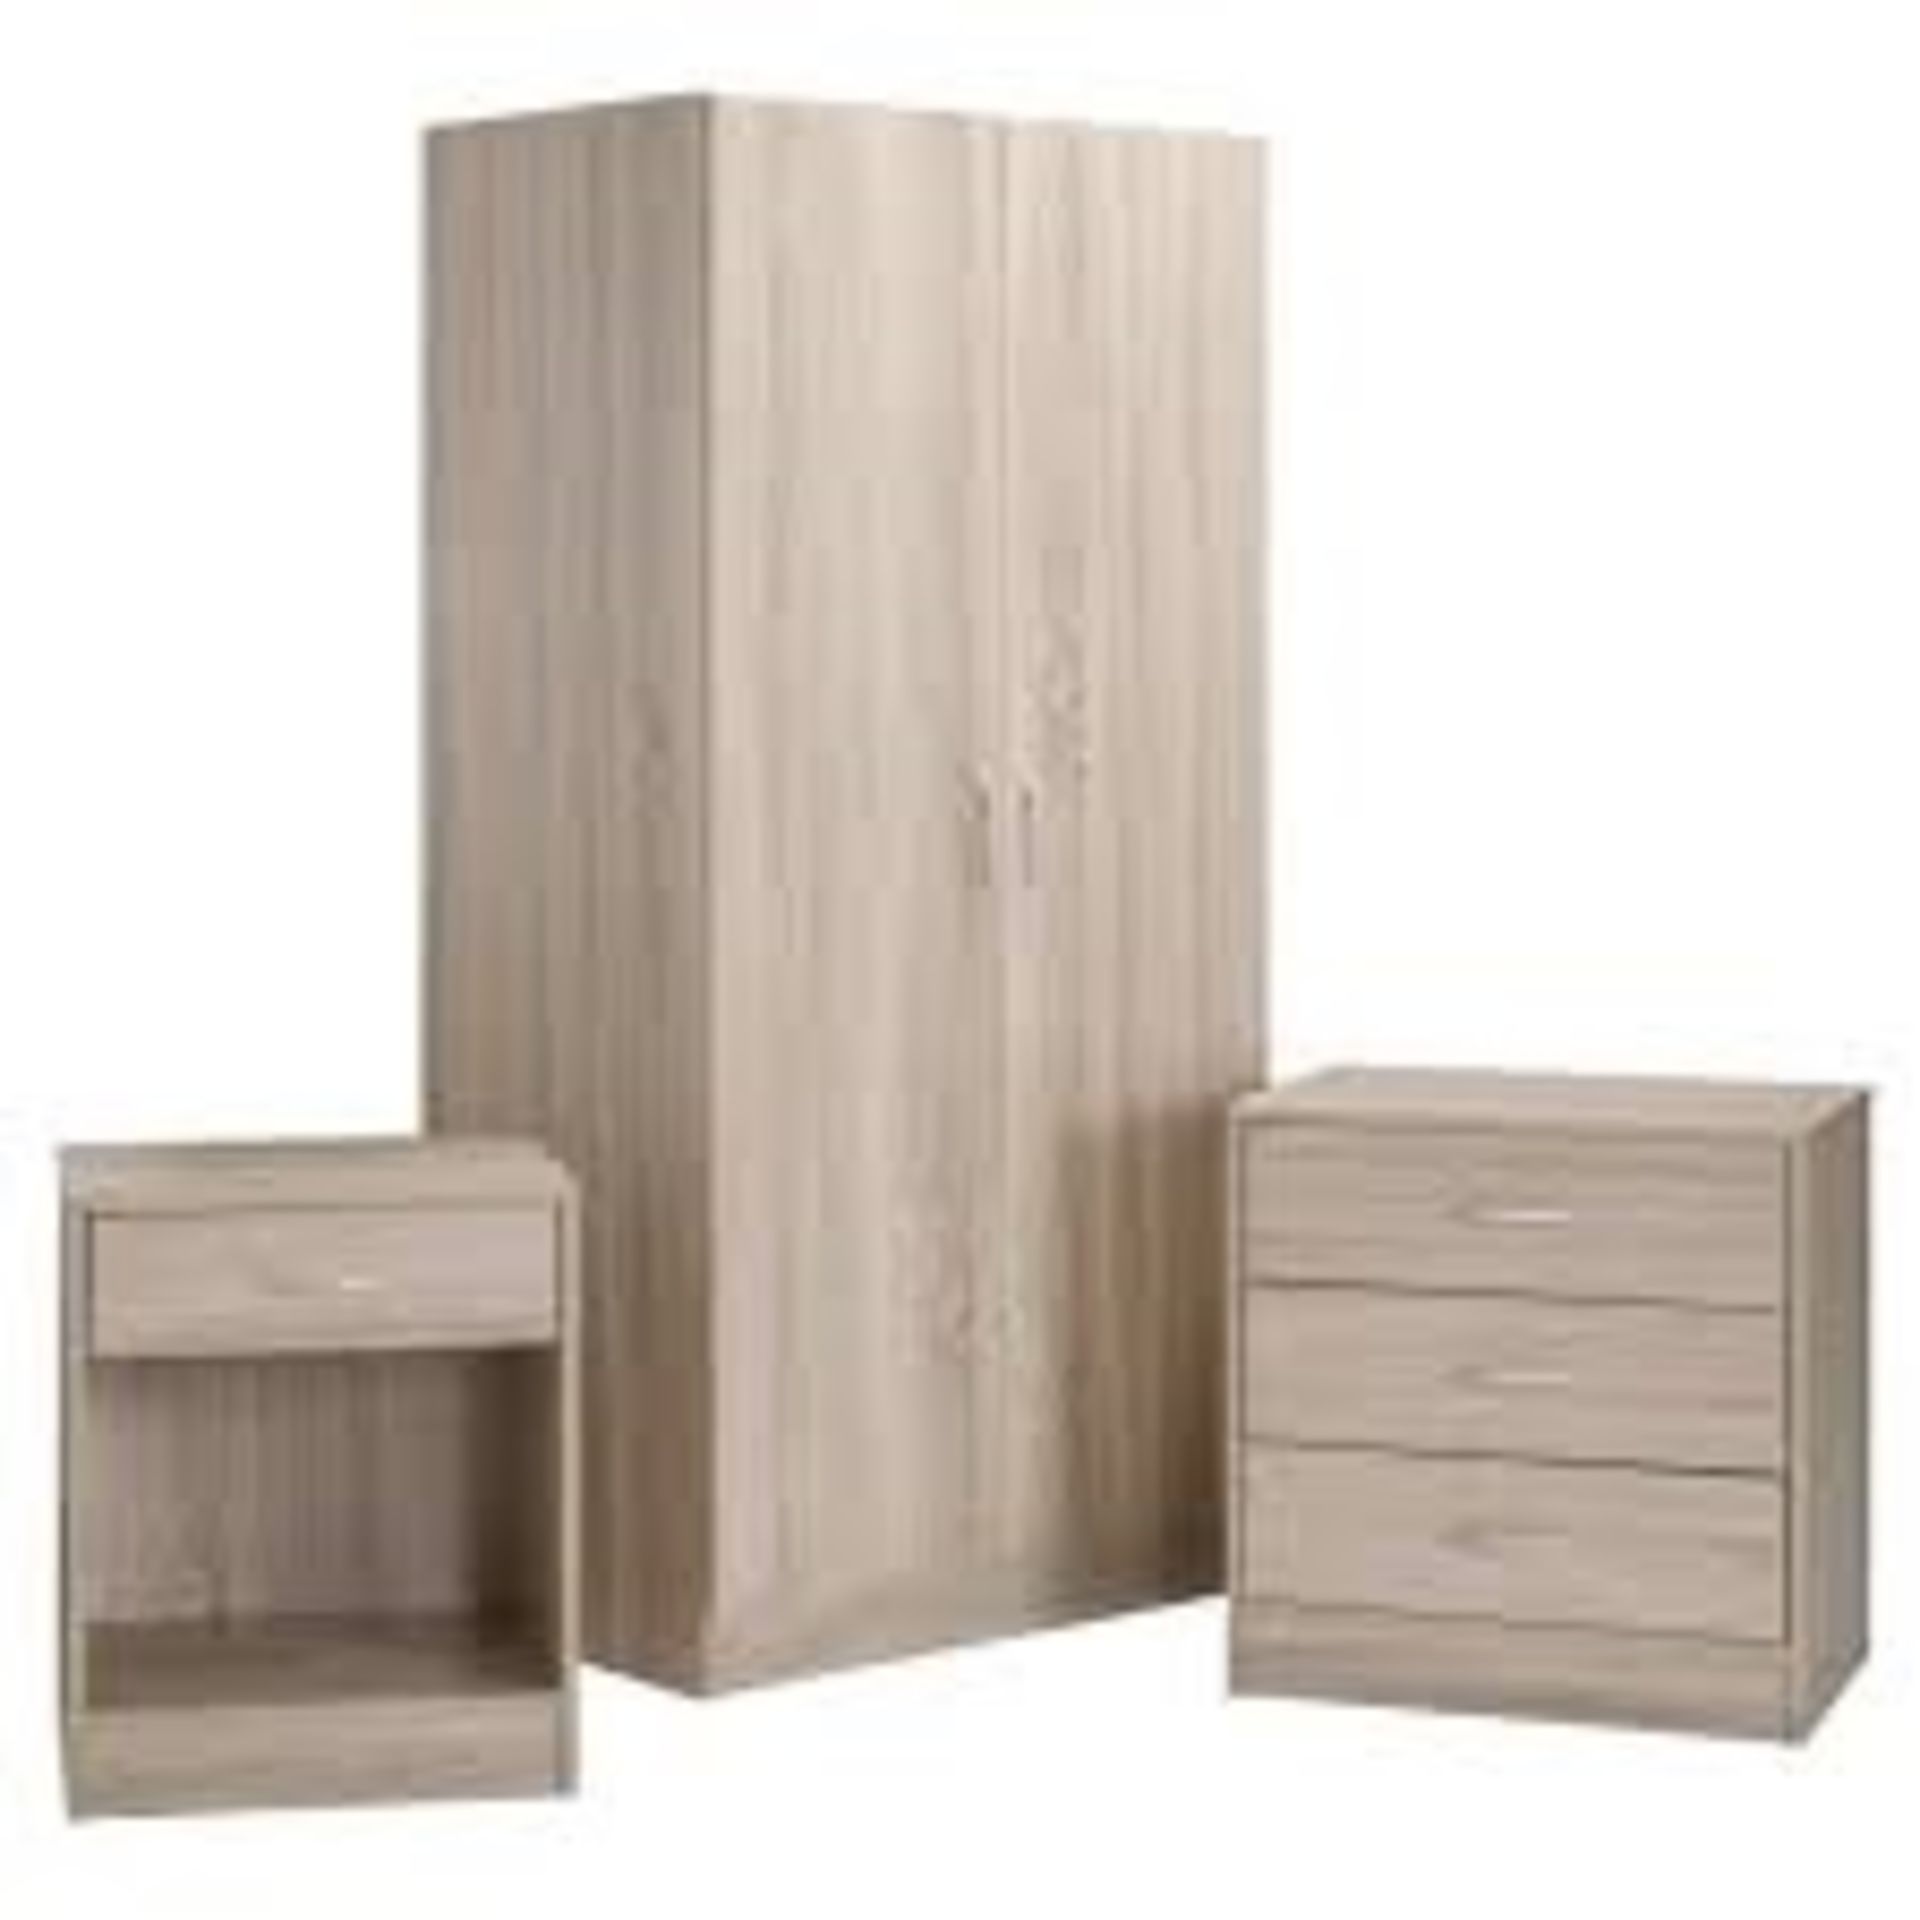 1 BRAND NEW BOXED DELTA OAK BEDROOM FURNITURE SET TO INCLUDE 2 DOOR WARDROBE, 3 DRAWER CHEST AND